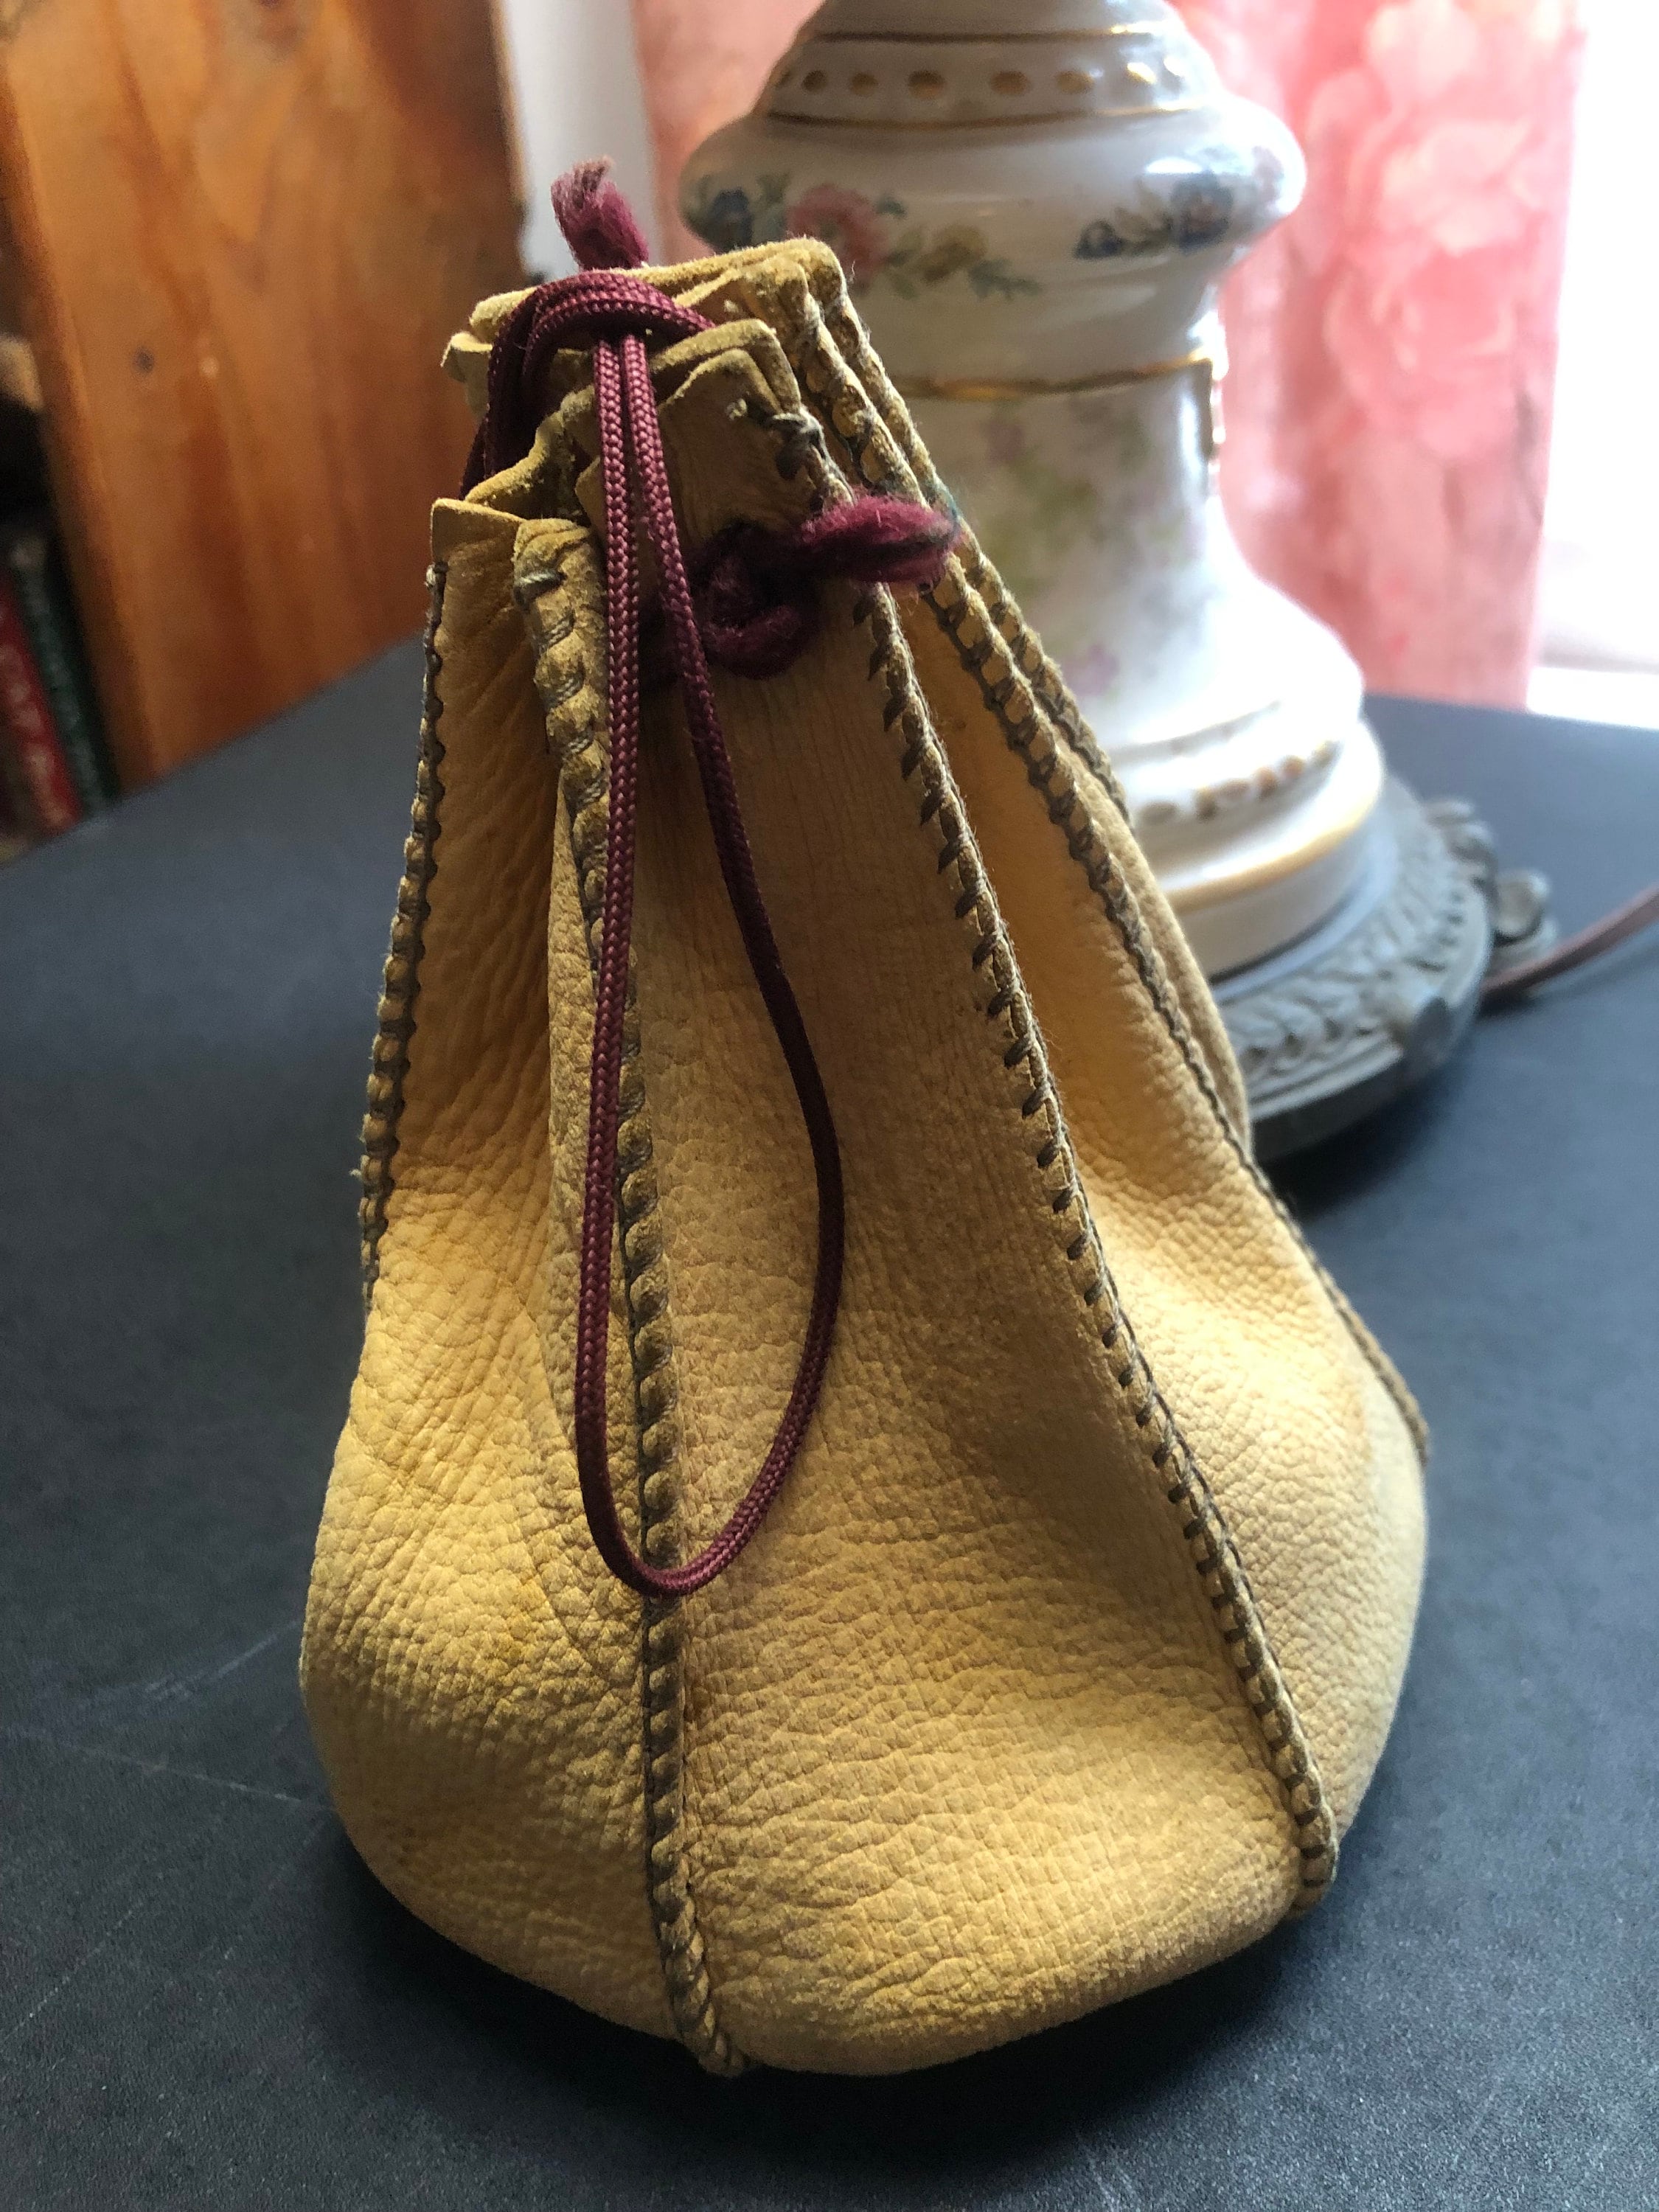 Hand Bags - Pirate Gold Coins